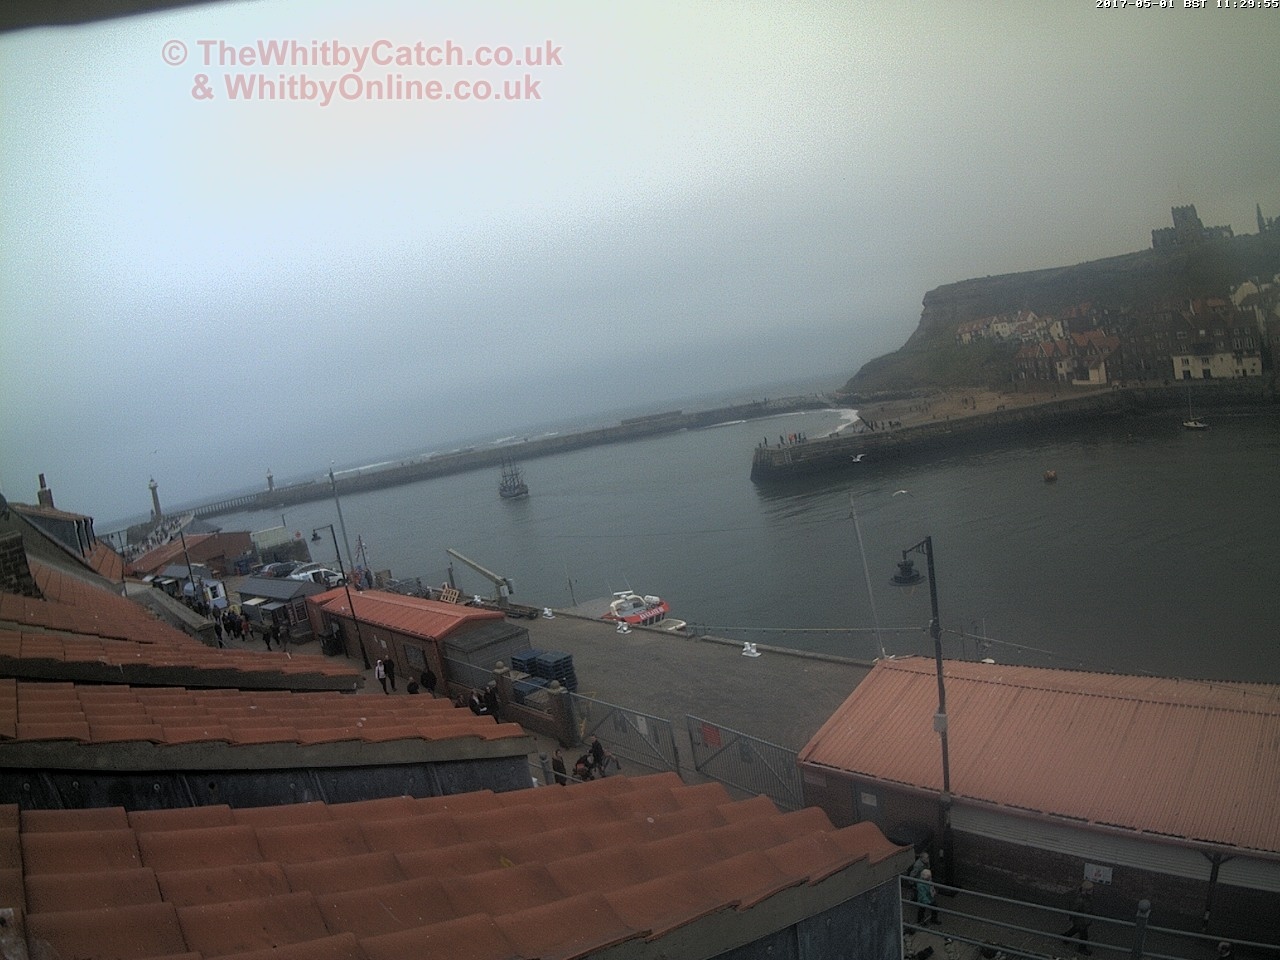 Whitby Mon 1st May 2017 11:30.